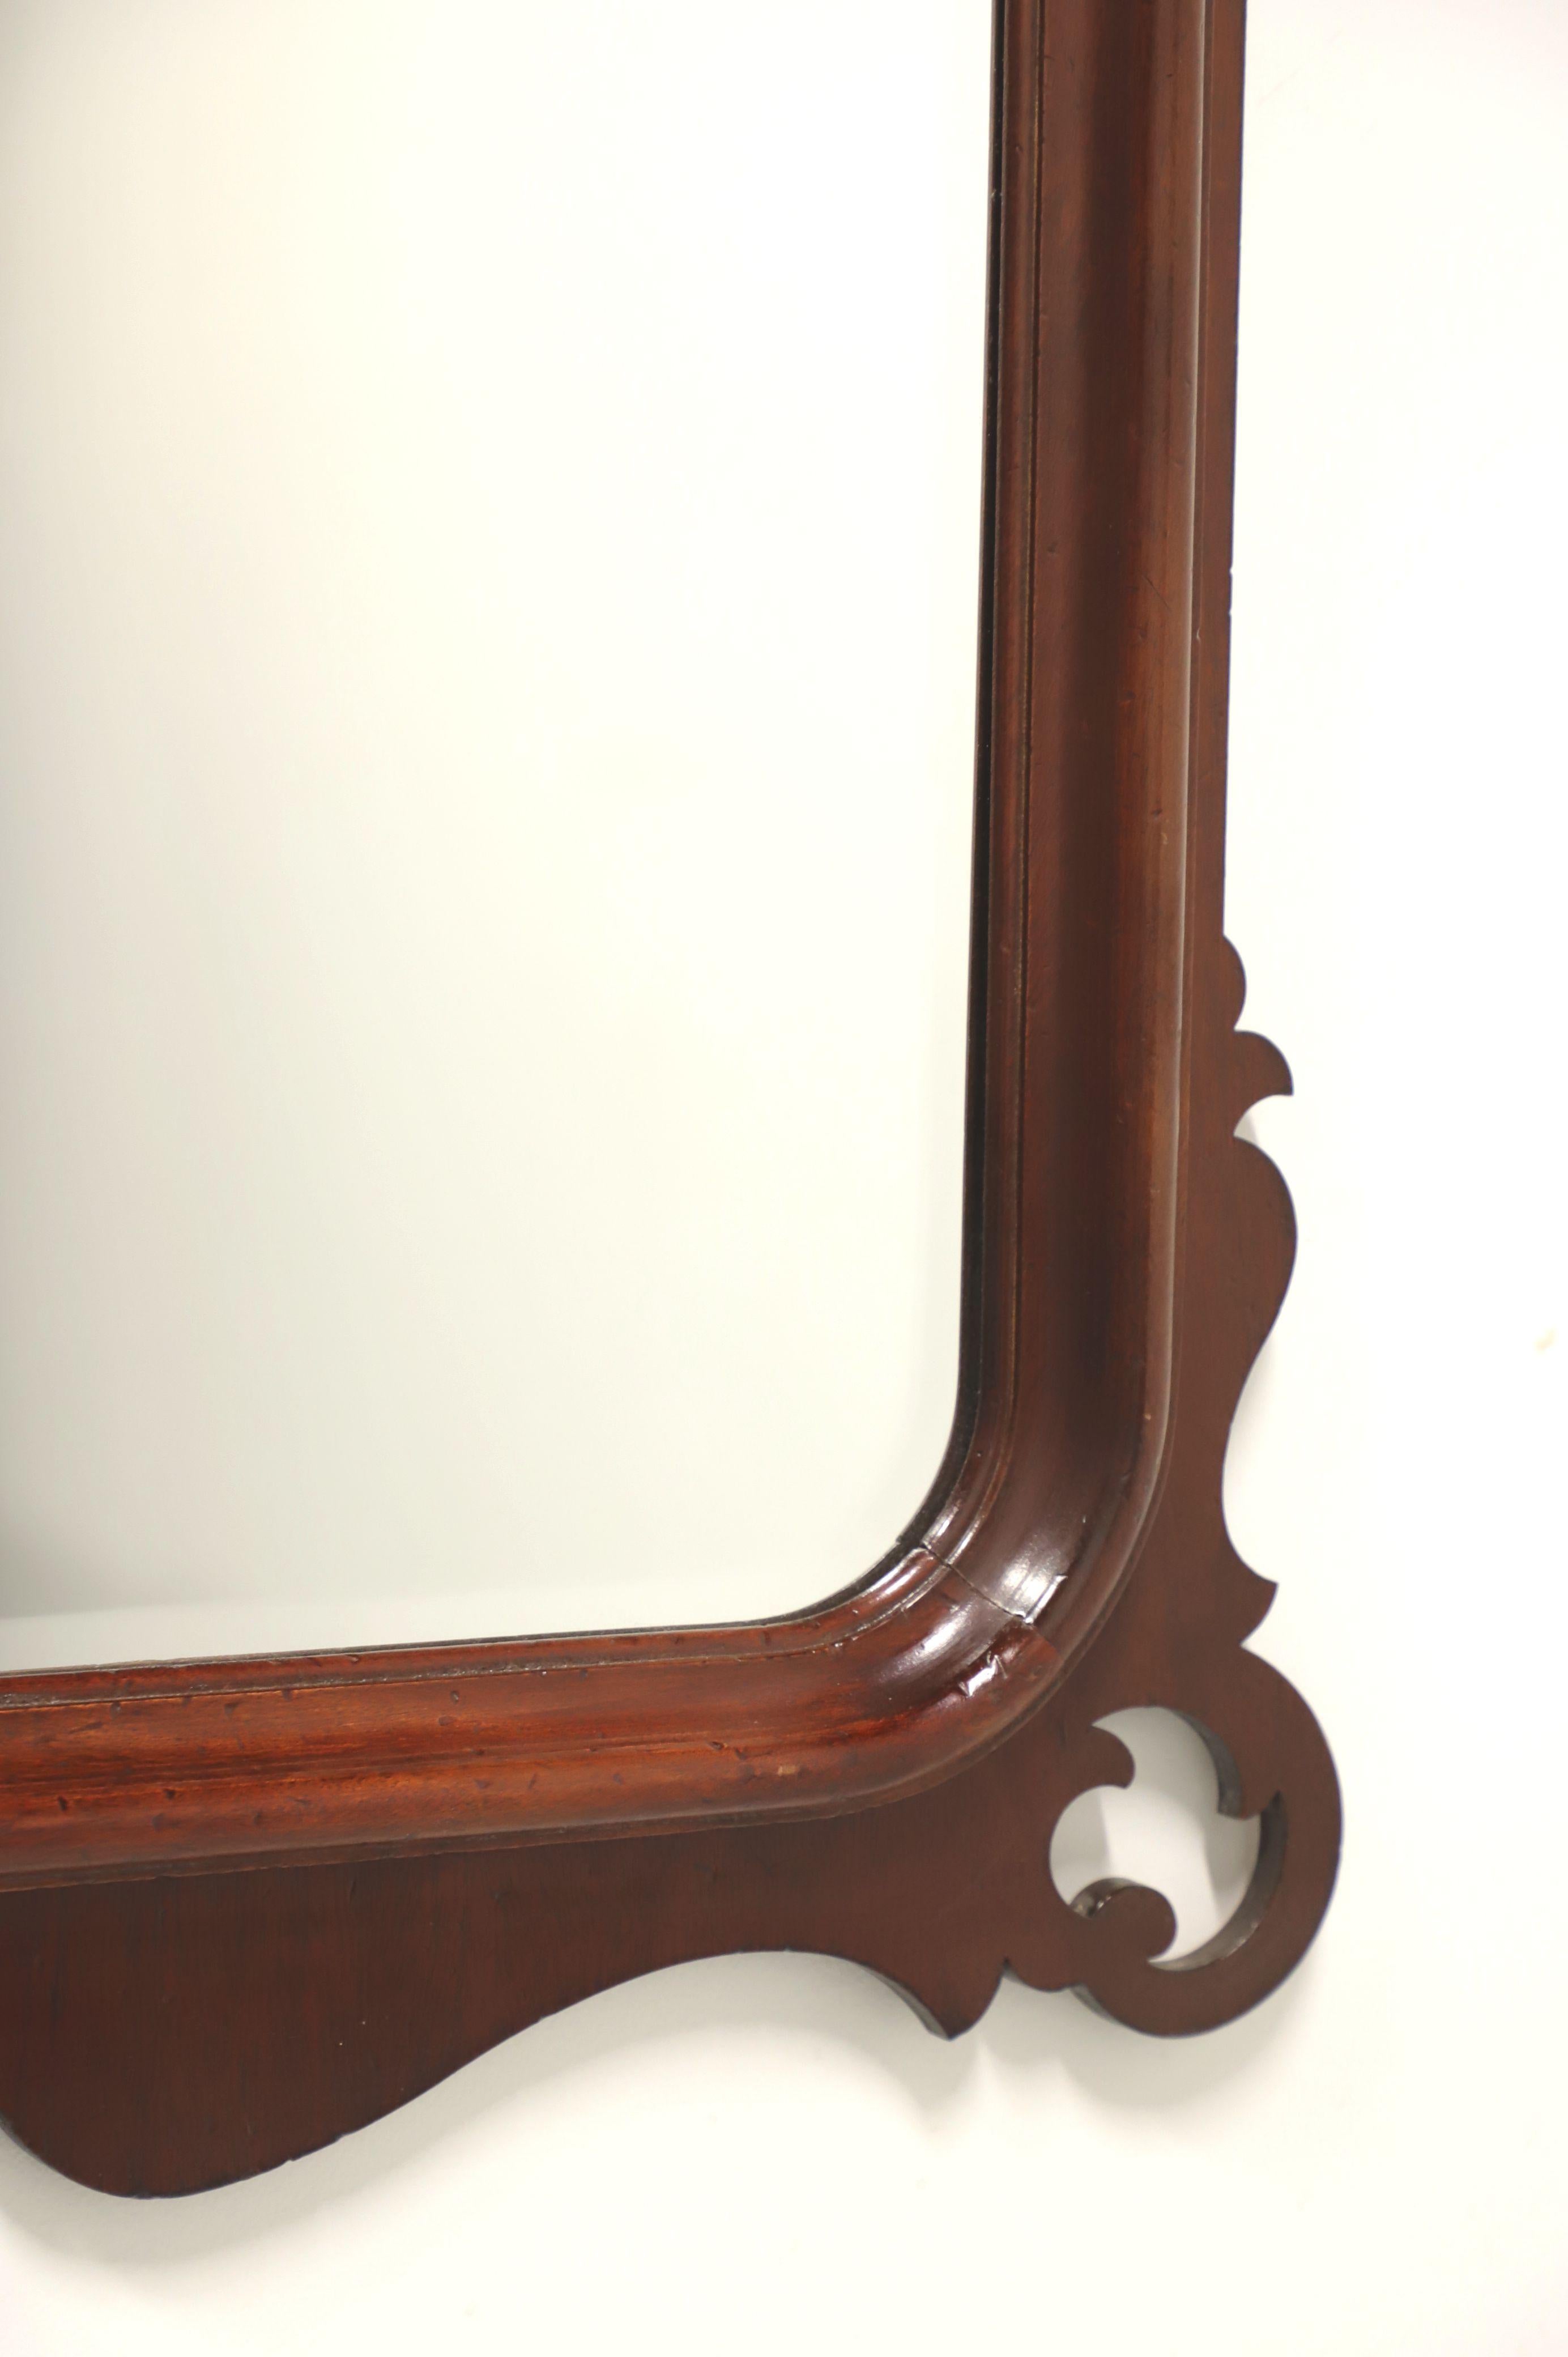 LEXINGTON Distressed Mahogany Chippendale Style Wall Mirror 2